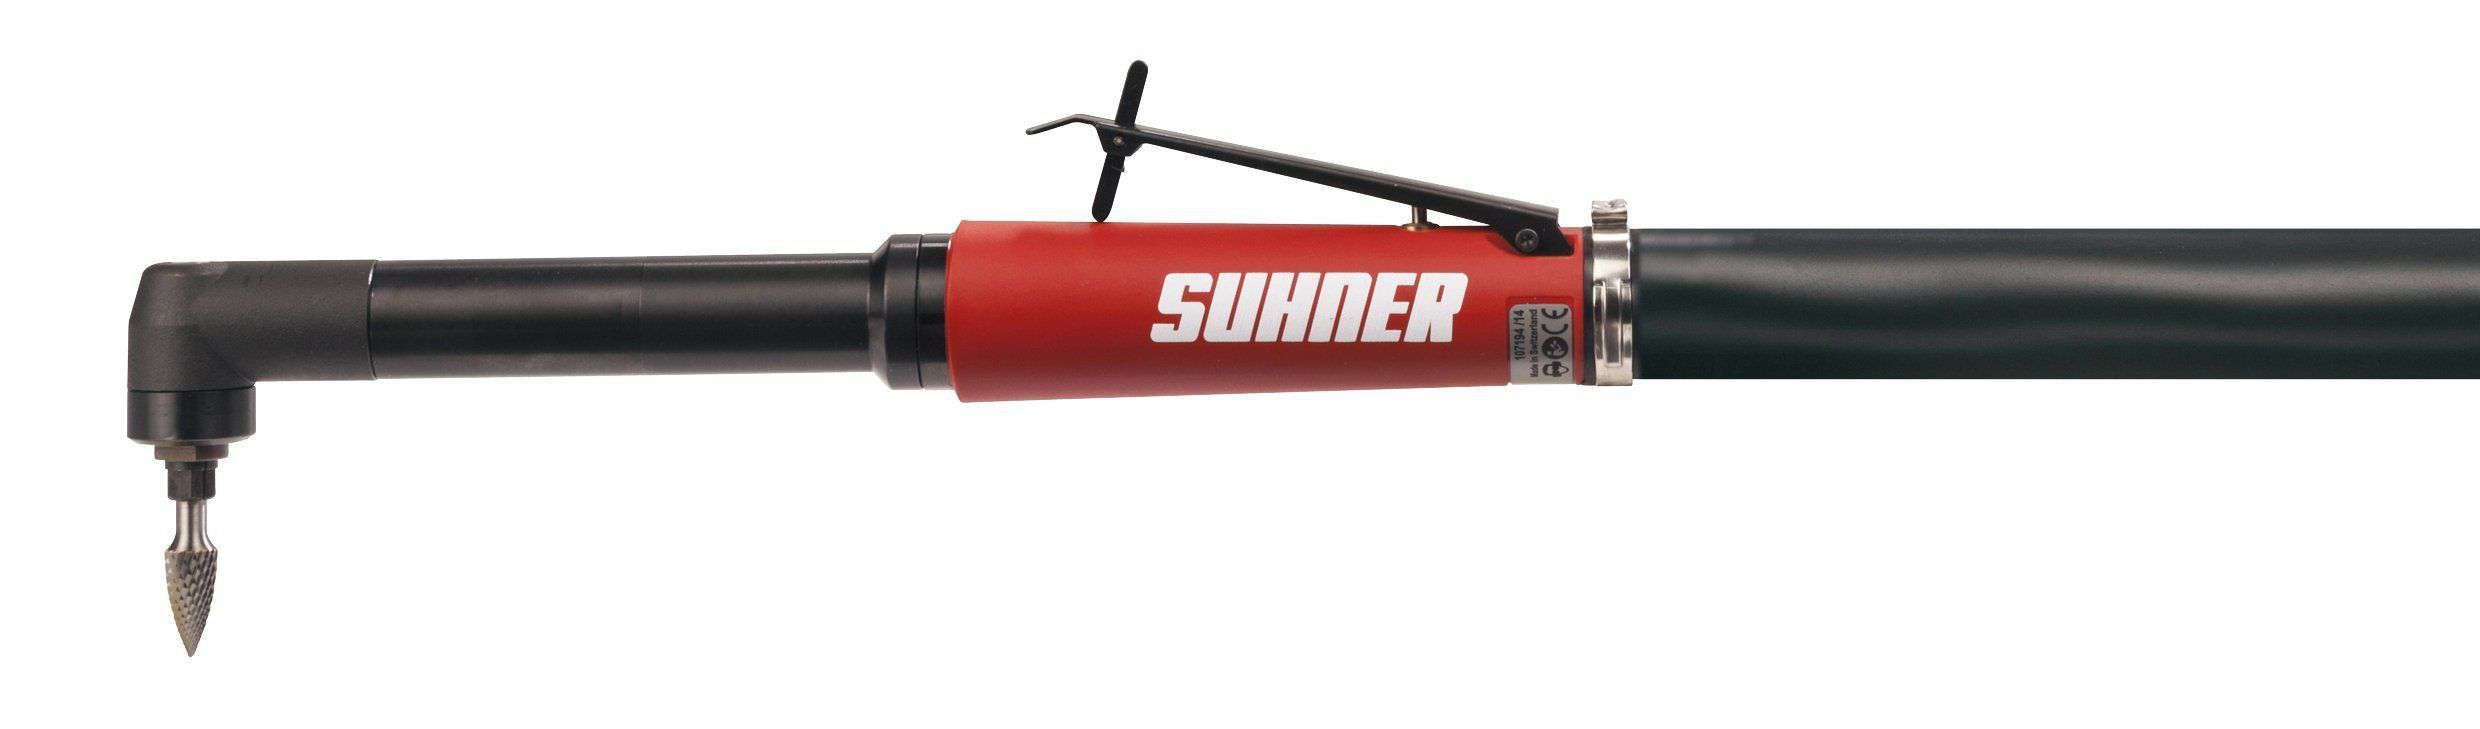 Suhner LVC 20 Long Neck Right Angle Die Grinder 20000 rpm 0.47 hp 1/4" Collet